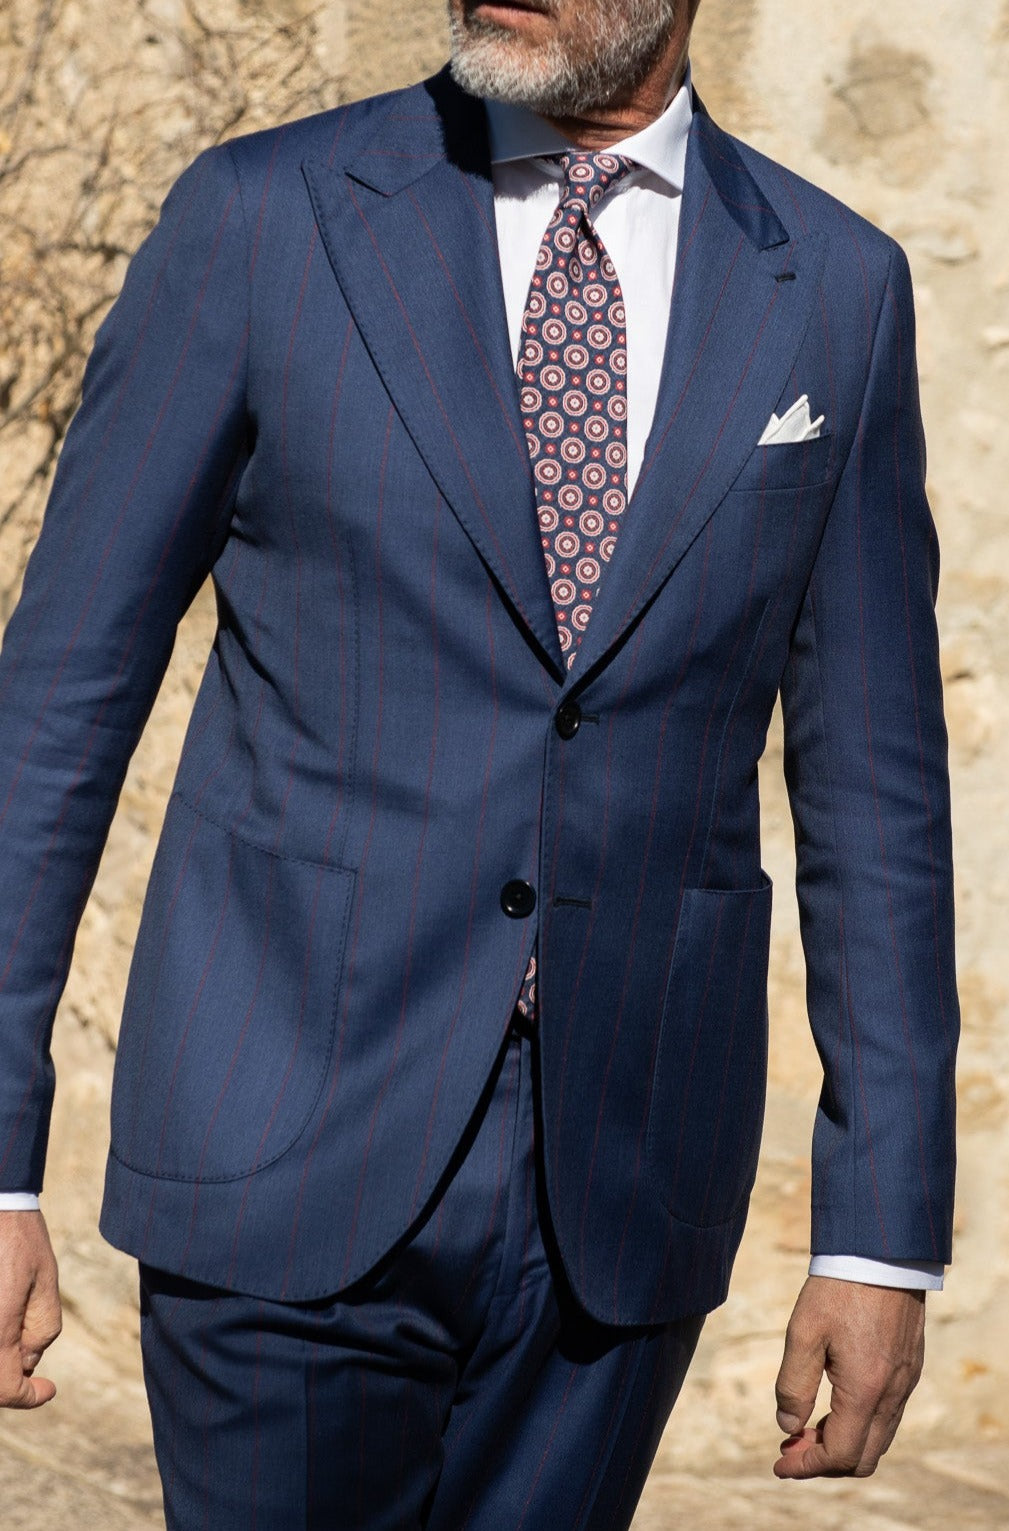 Blue and red striped suit "Made to Order" - Made in Italy